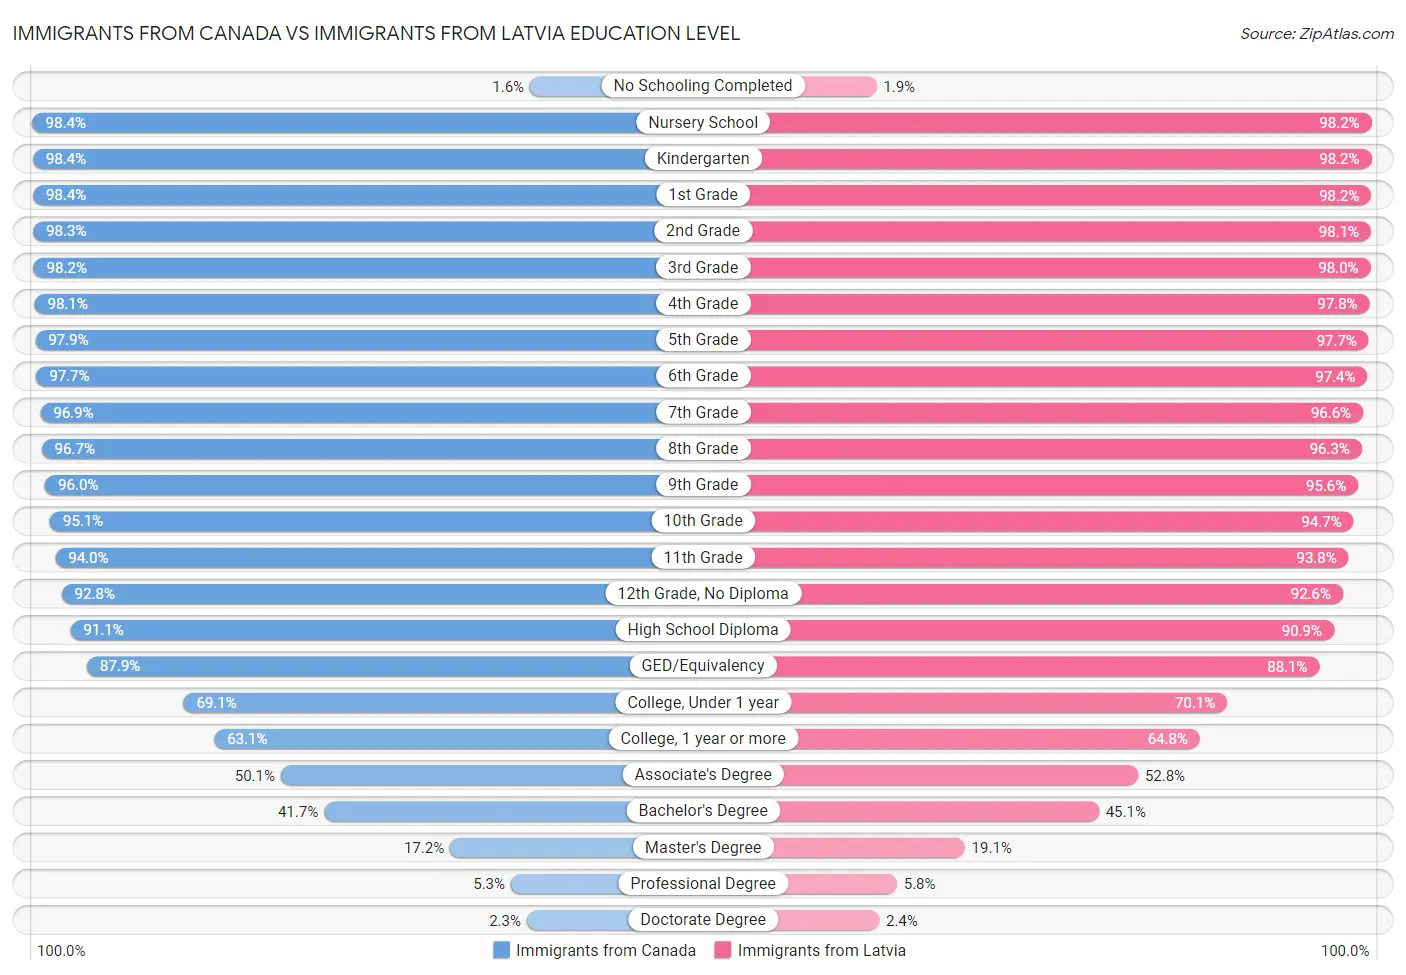 Immigrants from Canada vs Immigrants from Latvia Education Level